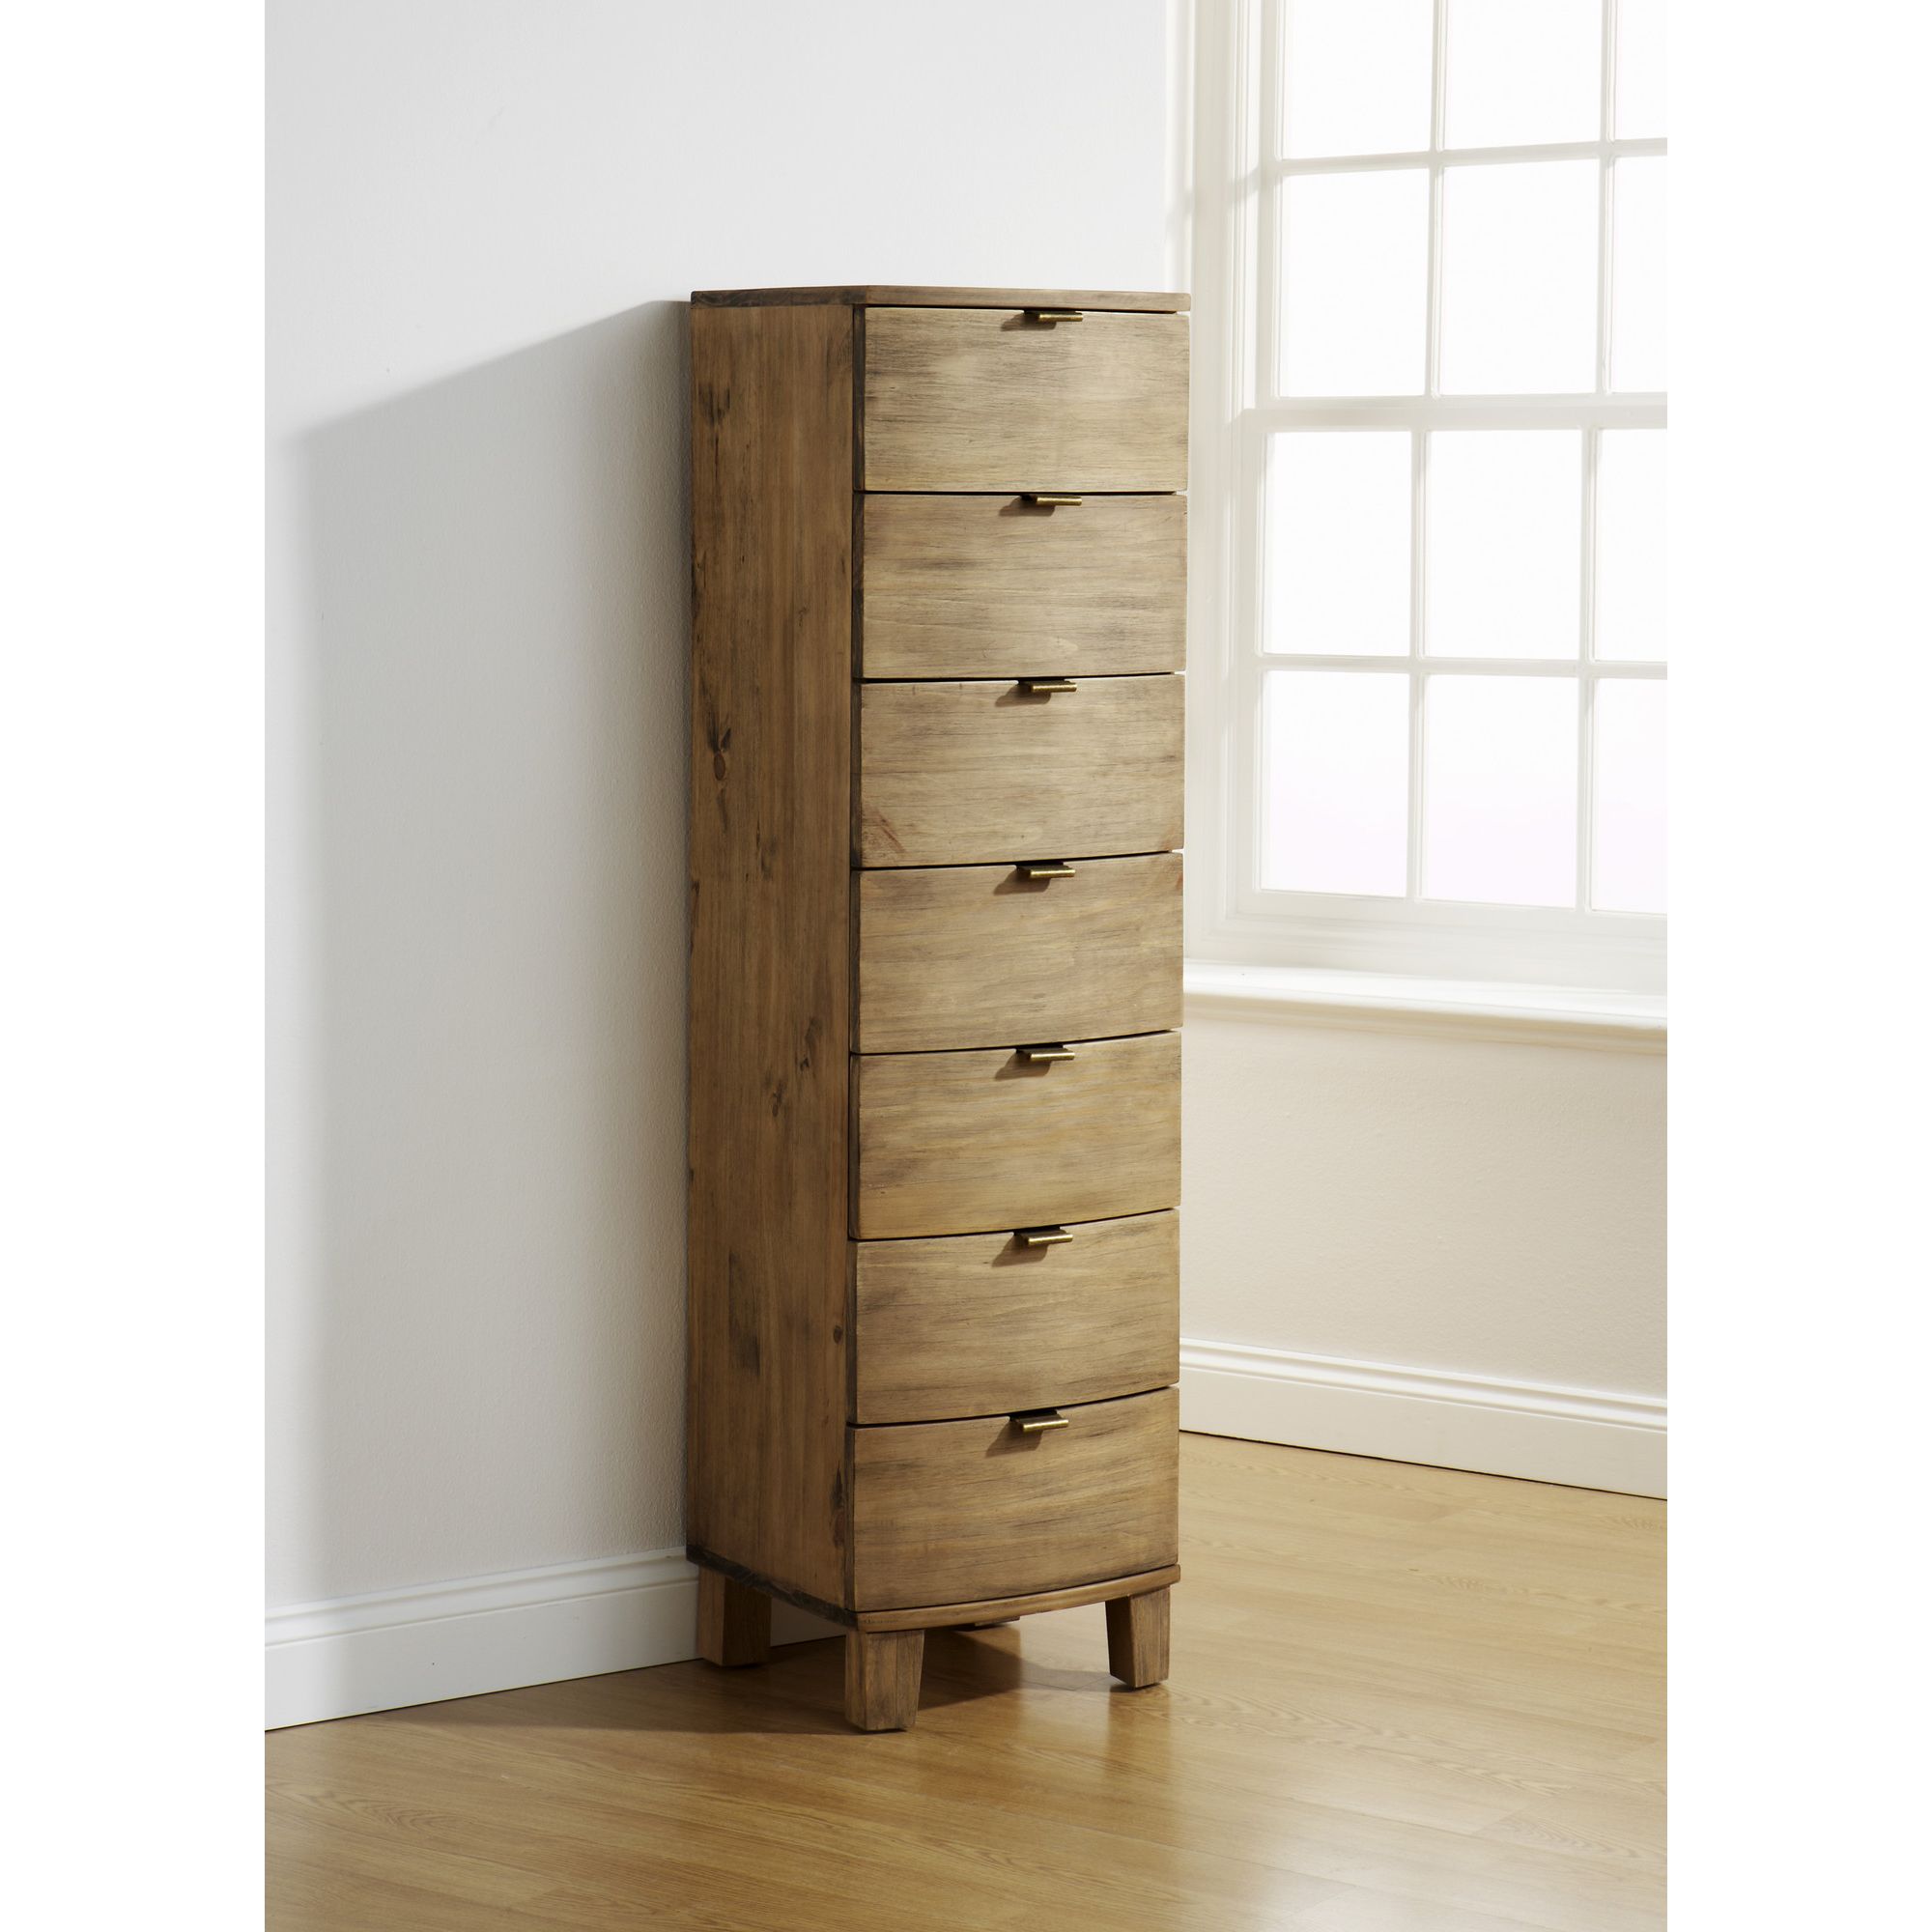 Elements Bow Curved 6 Drawer Tallboy at Tesco Direct